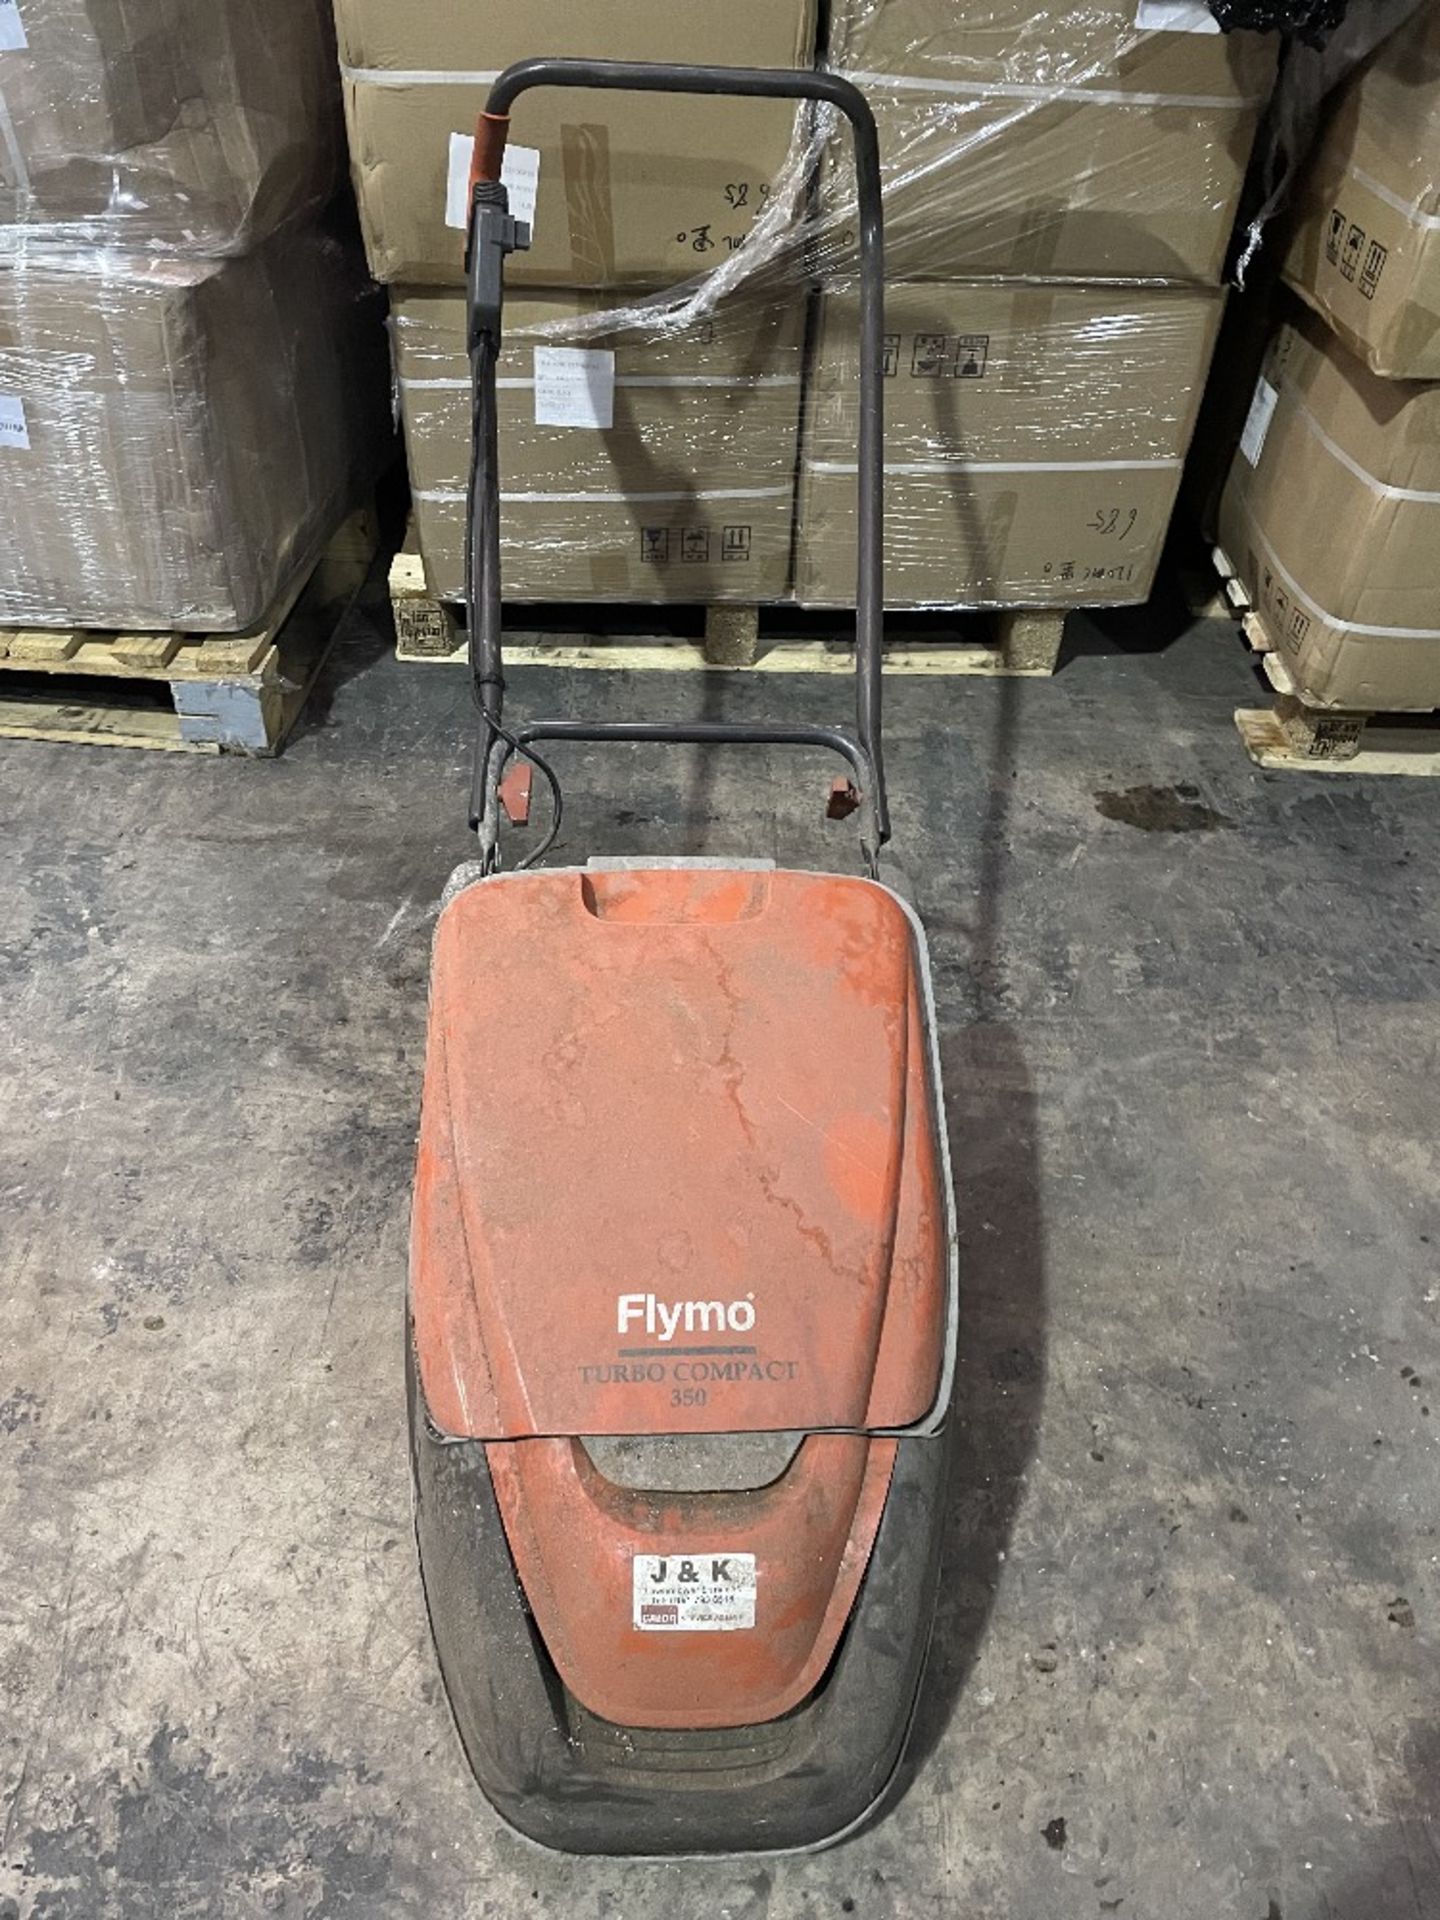 Flymo Turbo Compact 350 Hover Mower